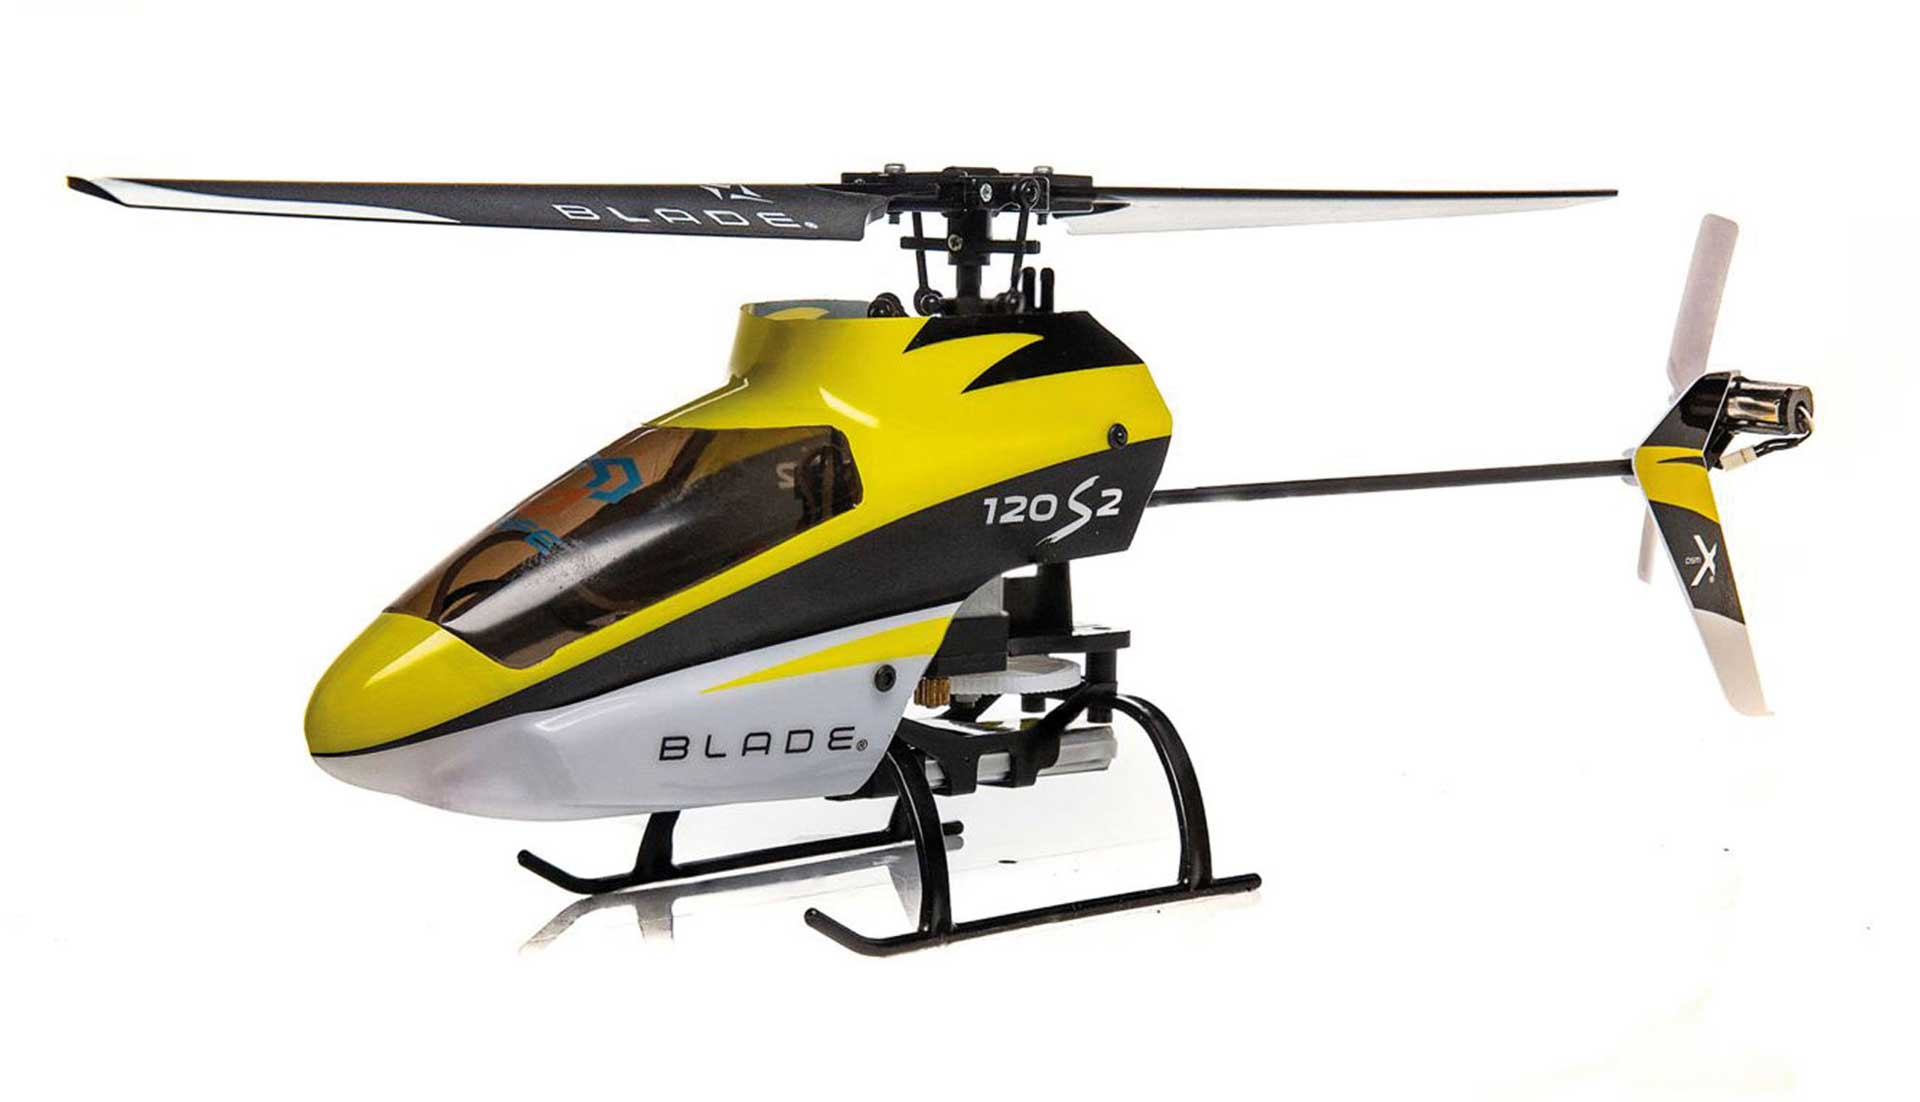 BLADE 120 S2 RTF with SAFE Technology